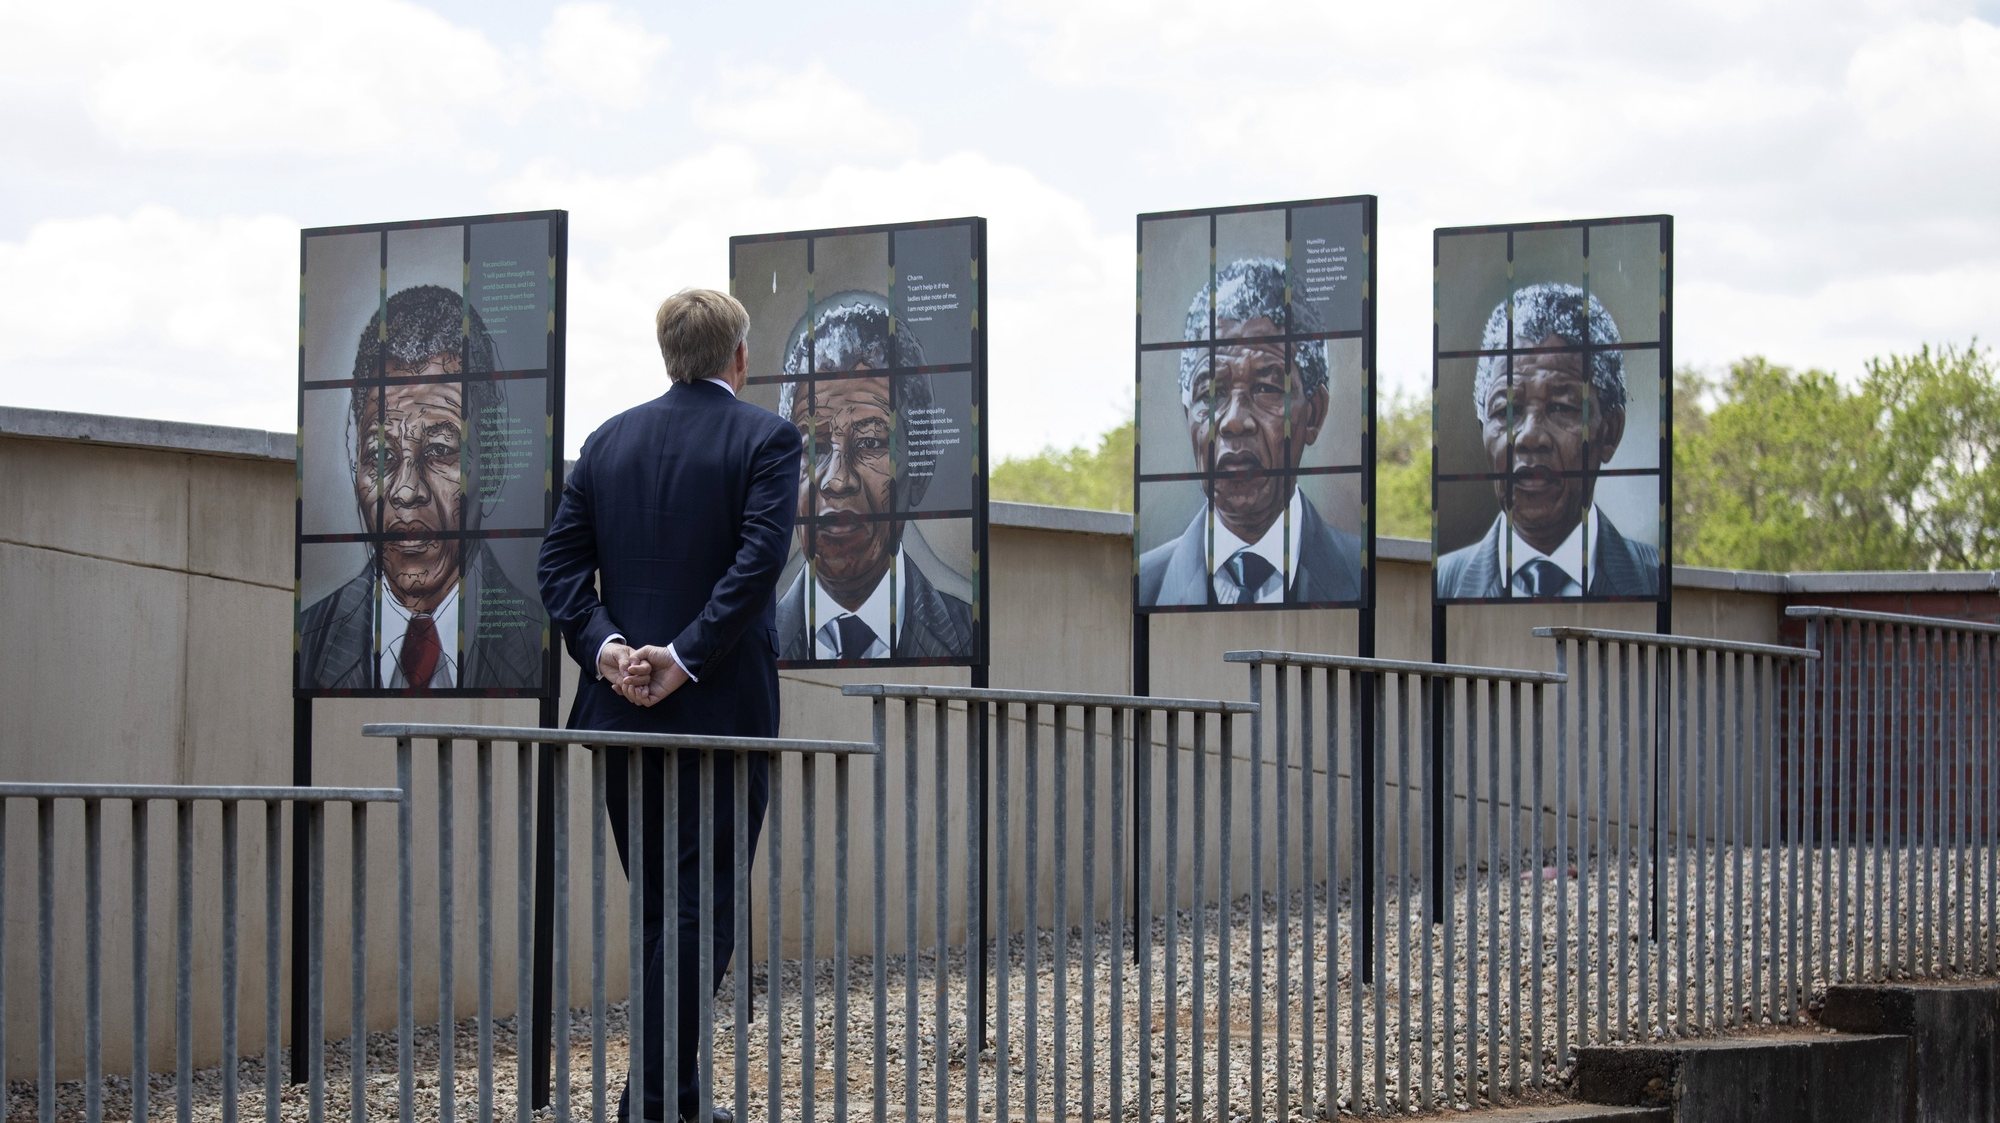 epa10925519 King Willem-Alexander of the Netherlands looks at images of Nelson Mandela during a visit to the Apartheid Museum in Johannesburg, South Africa, 18 October 2023. The Dutch Royal couple is visiting South Africa followed by Kenya.  EPA/KIM LUDBROOK